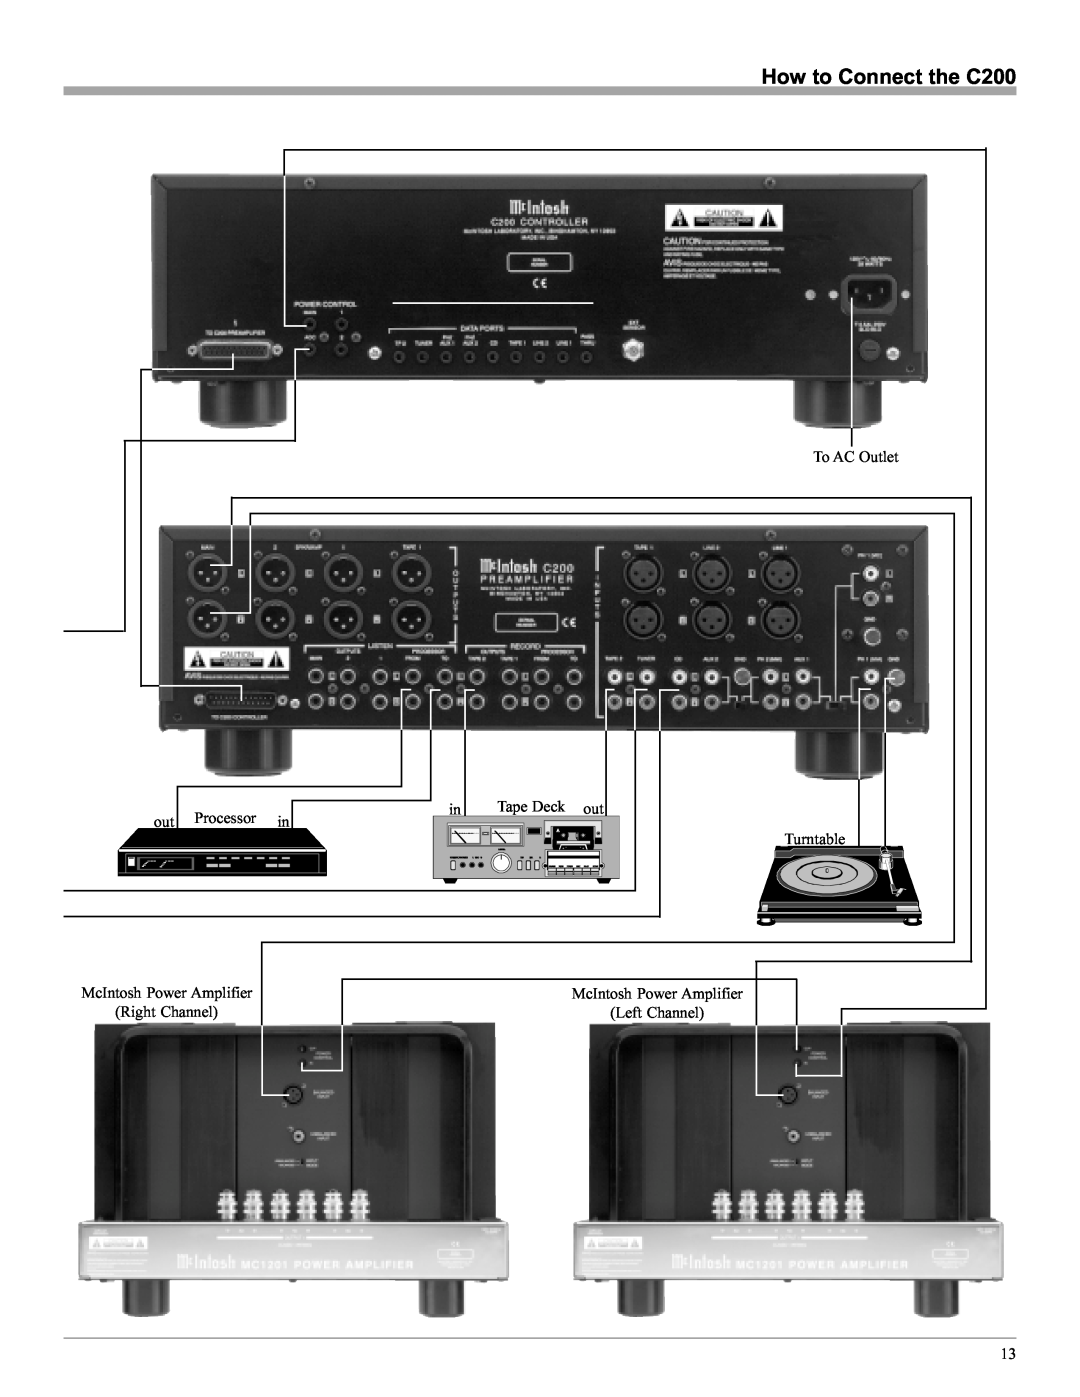 McIntosh manual How to Connect the C200, Turntable, Right Channel, Left Channel 